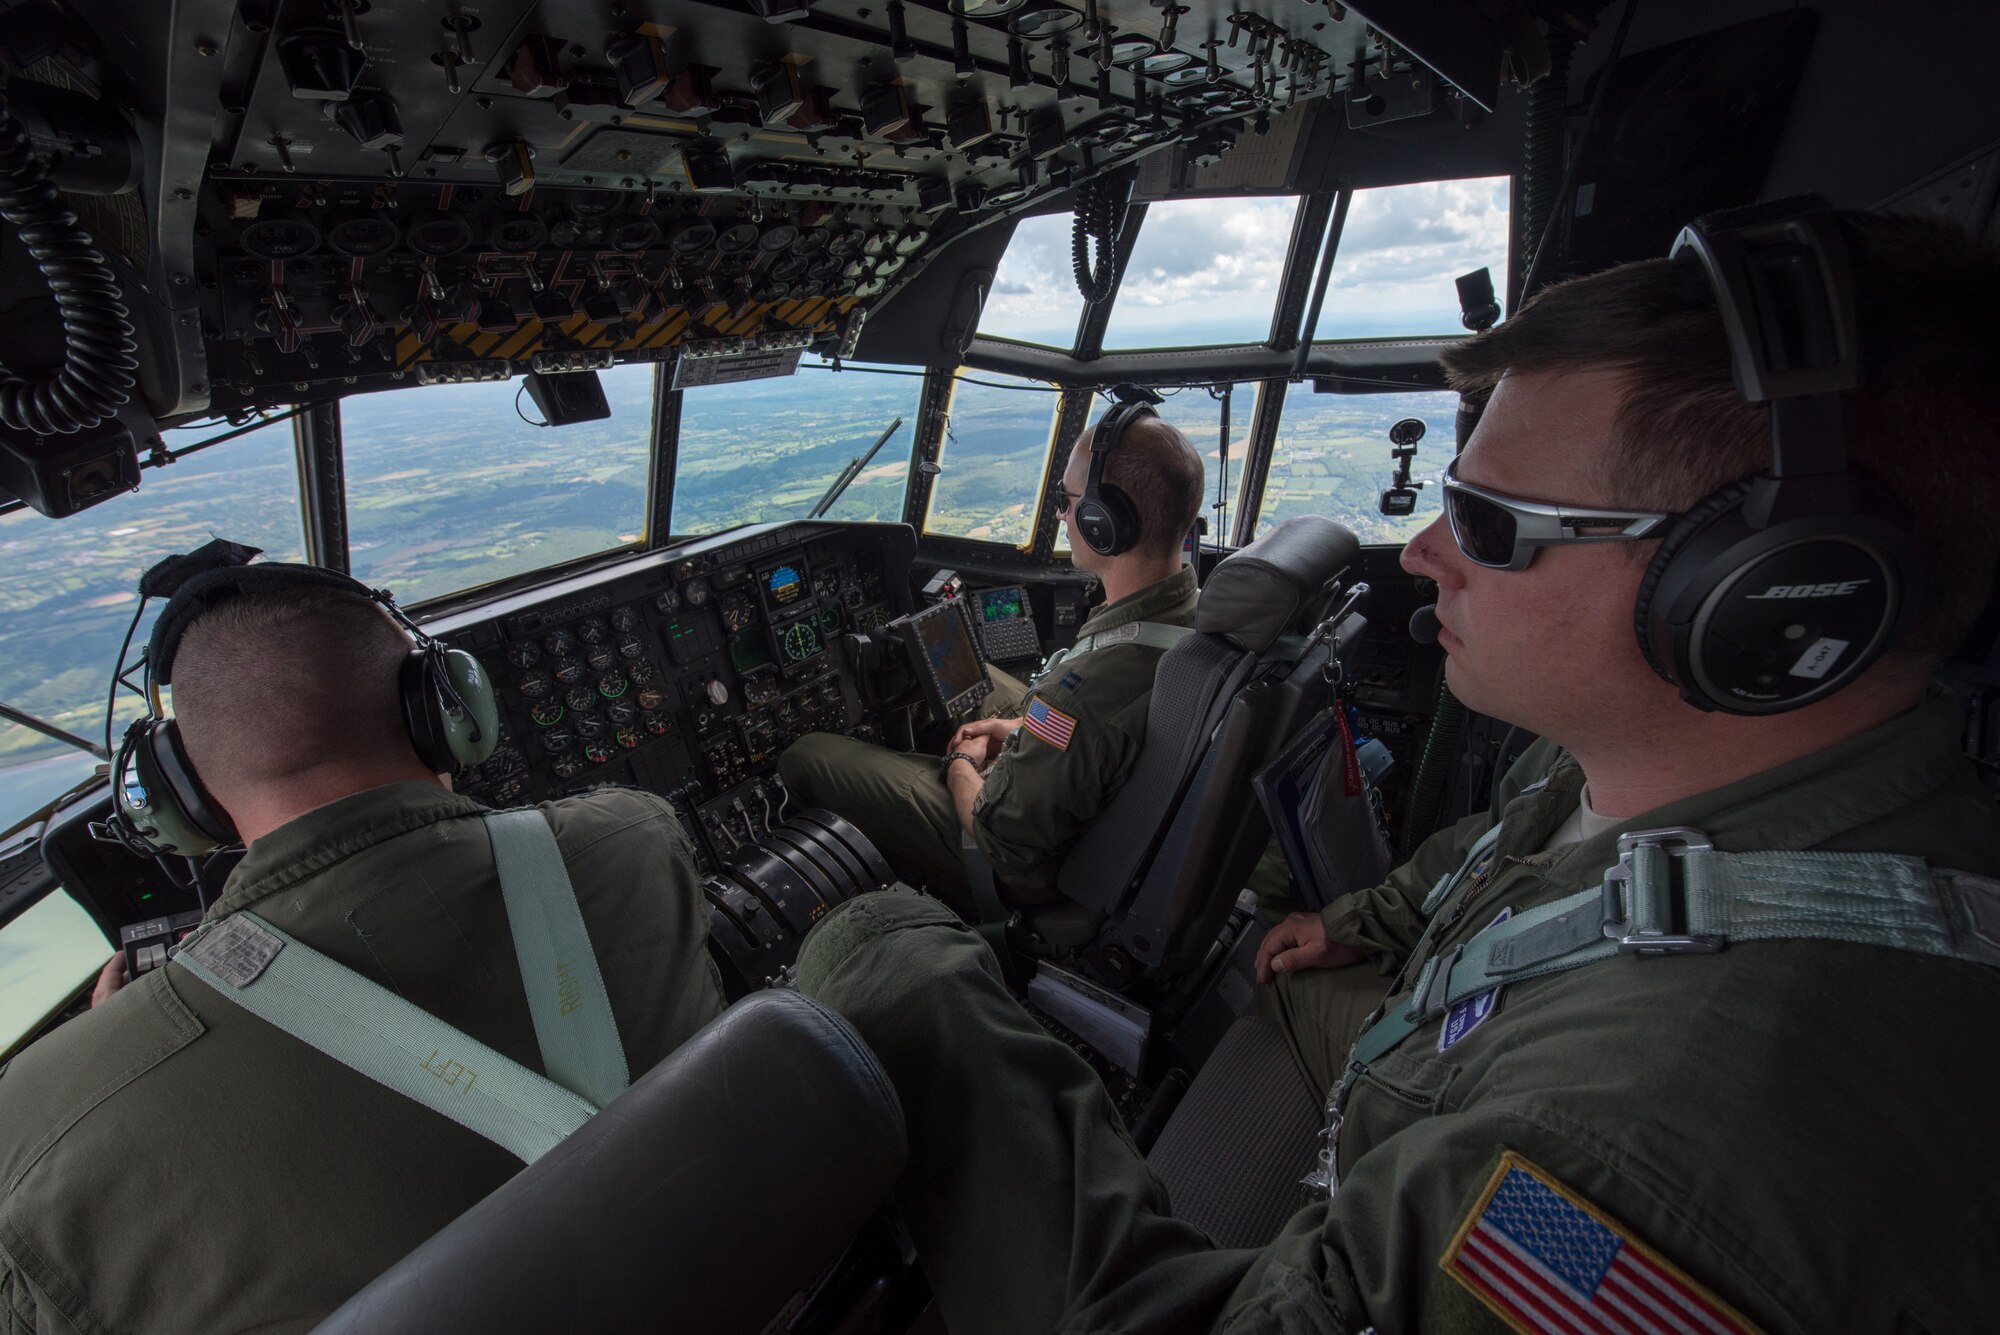 Aircrew from the U.S. Air Force Reserve’s 96th Airlift Squadron fly over Normandy, France, June 6, 2019, as part of the 75th-anniversary obserance of D-Day. Multiple units will participate in aerial events though June 9, including members of the Kentucky Air National Guard’s 123rd Airlift Wing; Air Force Reserve units from Minnesota, Alabama, and Colorado; and active duty U.S. Air Force units from Ramstein Air Base, Germany, Dyess Air Force Base, Texas, and Little Rock Air Force Base, Ark. They will partner with military personnel from Belgium, France, The Netherlands and Romania. D-Day remains a historic reminder of how the dedicated resolve of allies with a common purpose and shared vision builds proven partnerships that endure. (U.S. Air National Guard photo by Phil Speck)